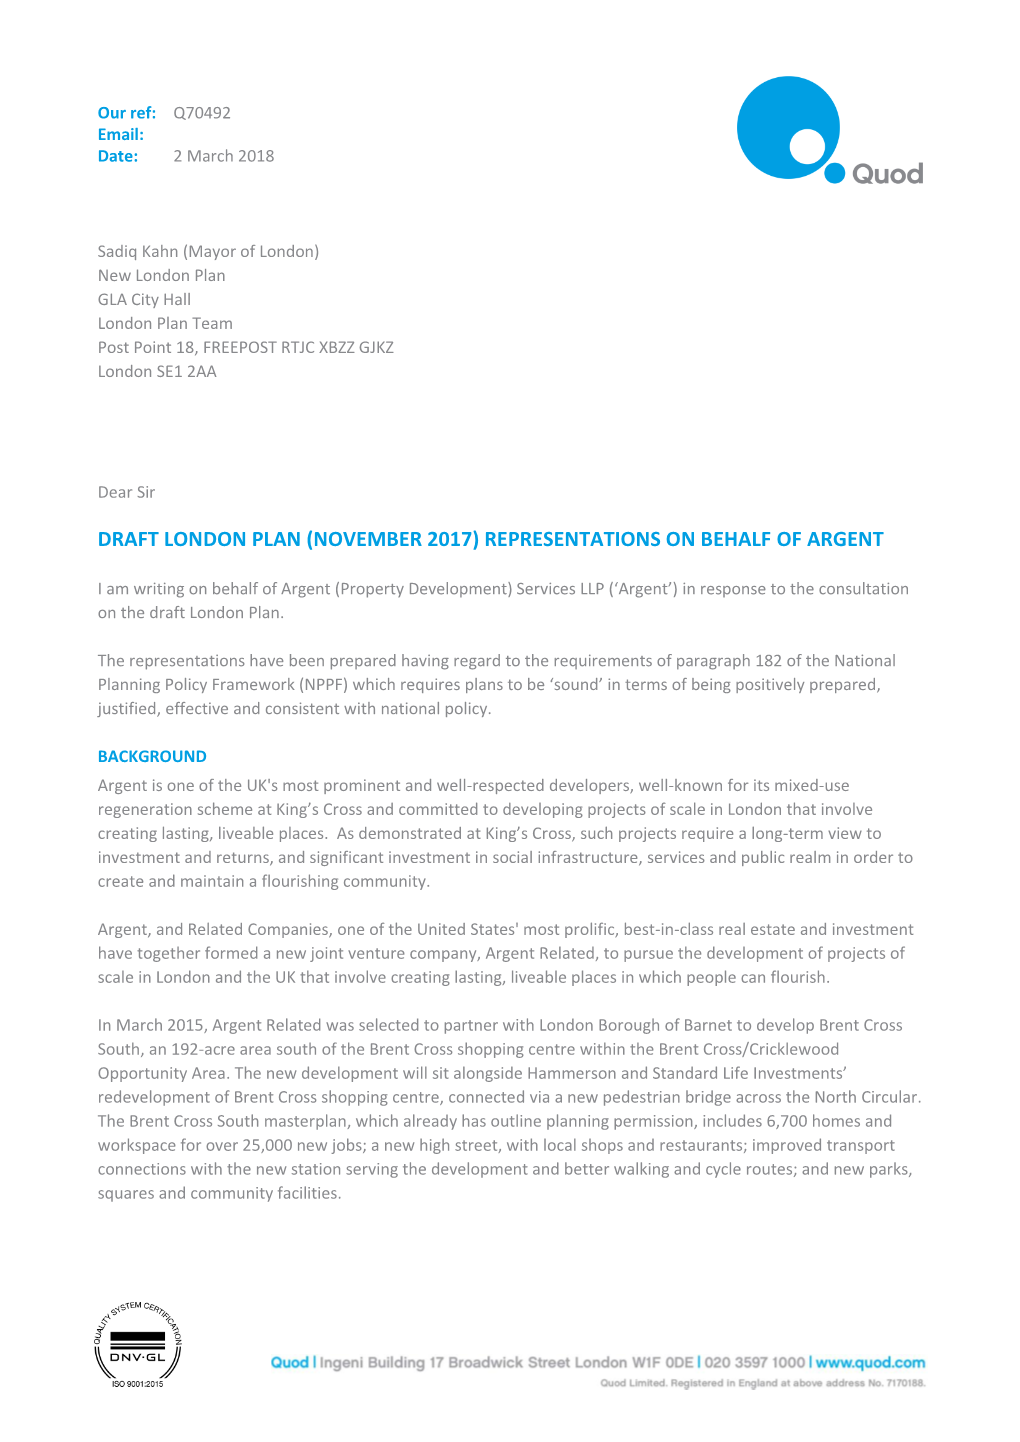 Argent (Property Development) Services LLP (‘Argent’) in Response to the Consultation on the Draft London Plan